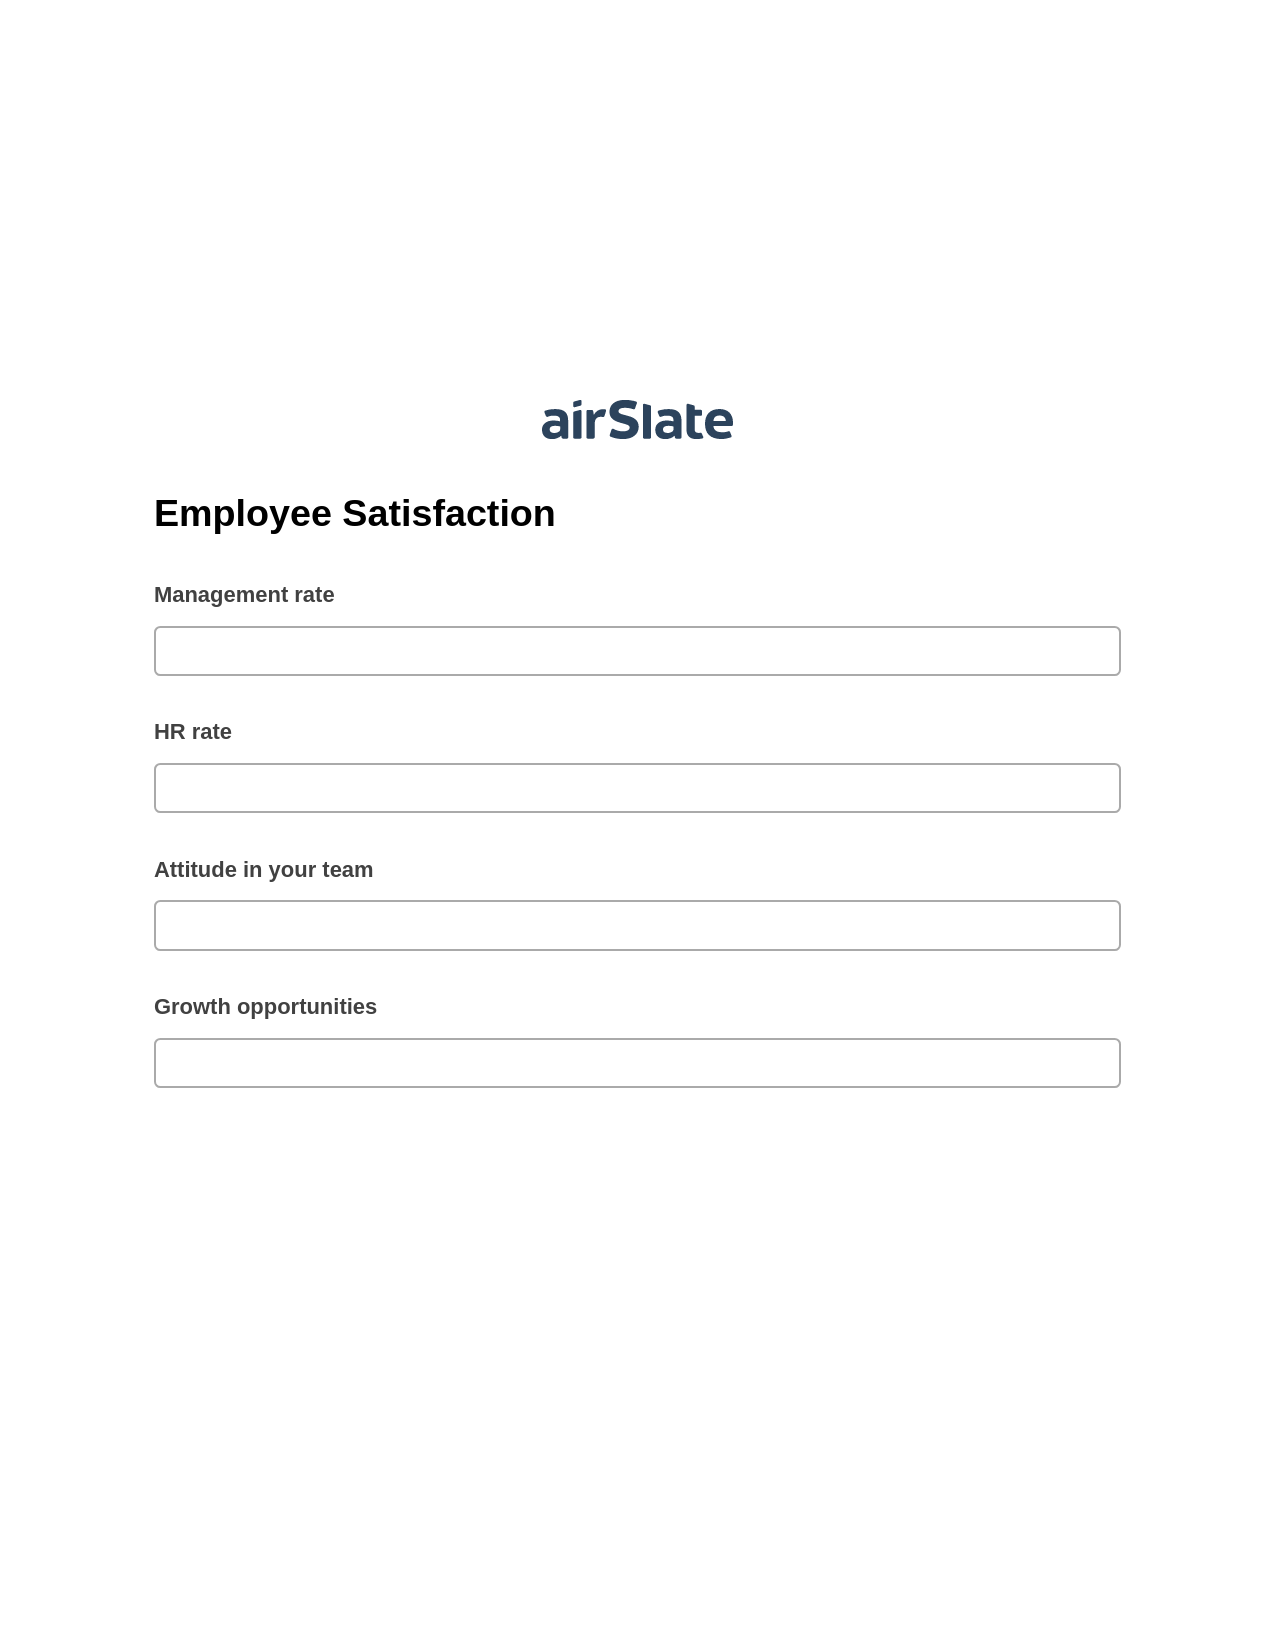 Employee Satisfaction Pre-fill from Google Sheets Bot, Email Notification Bot, Export to Smartsheet